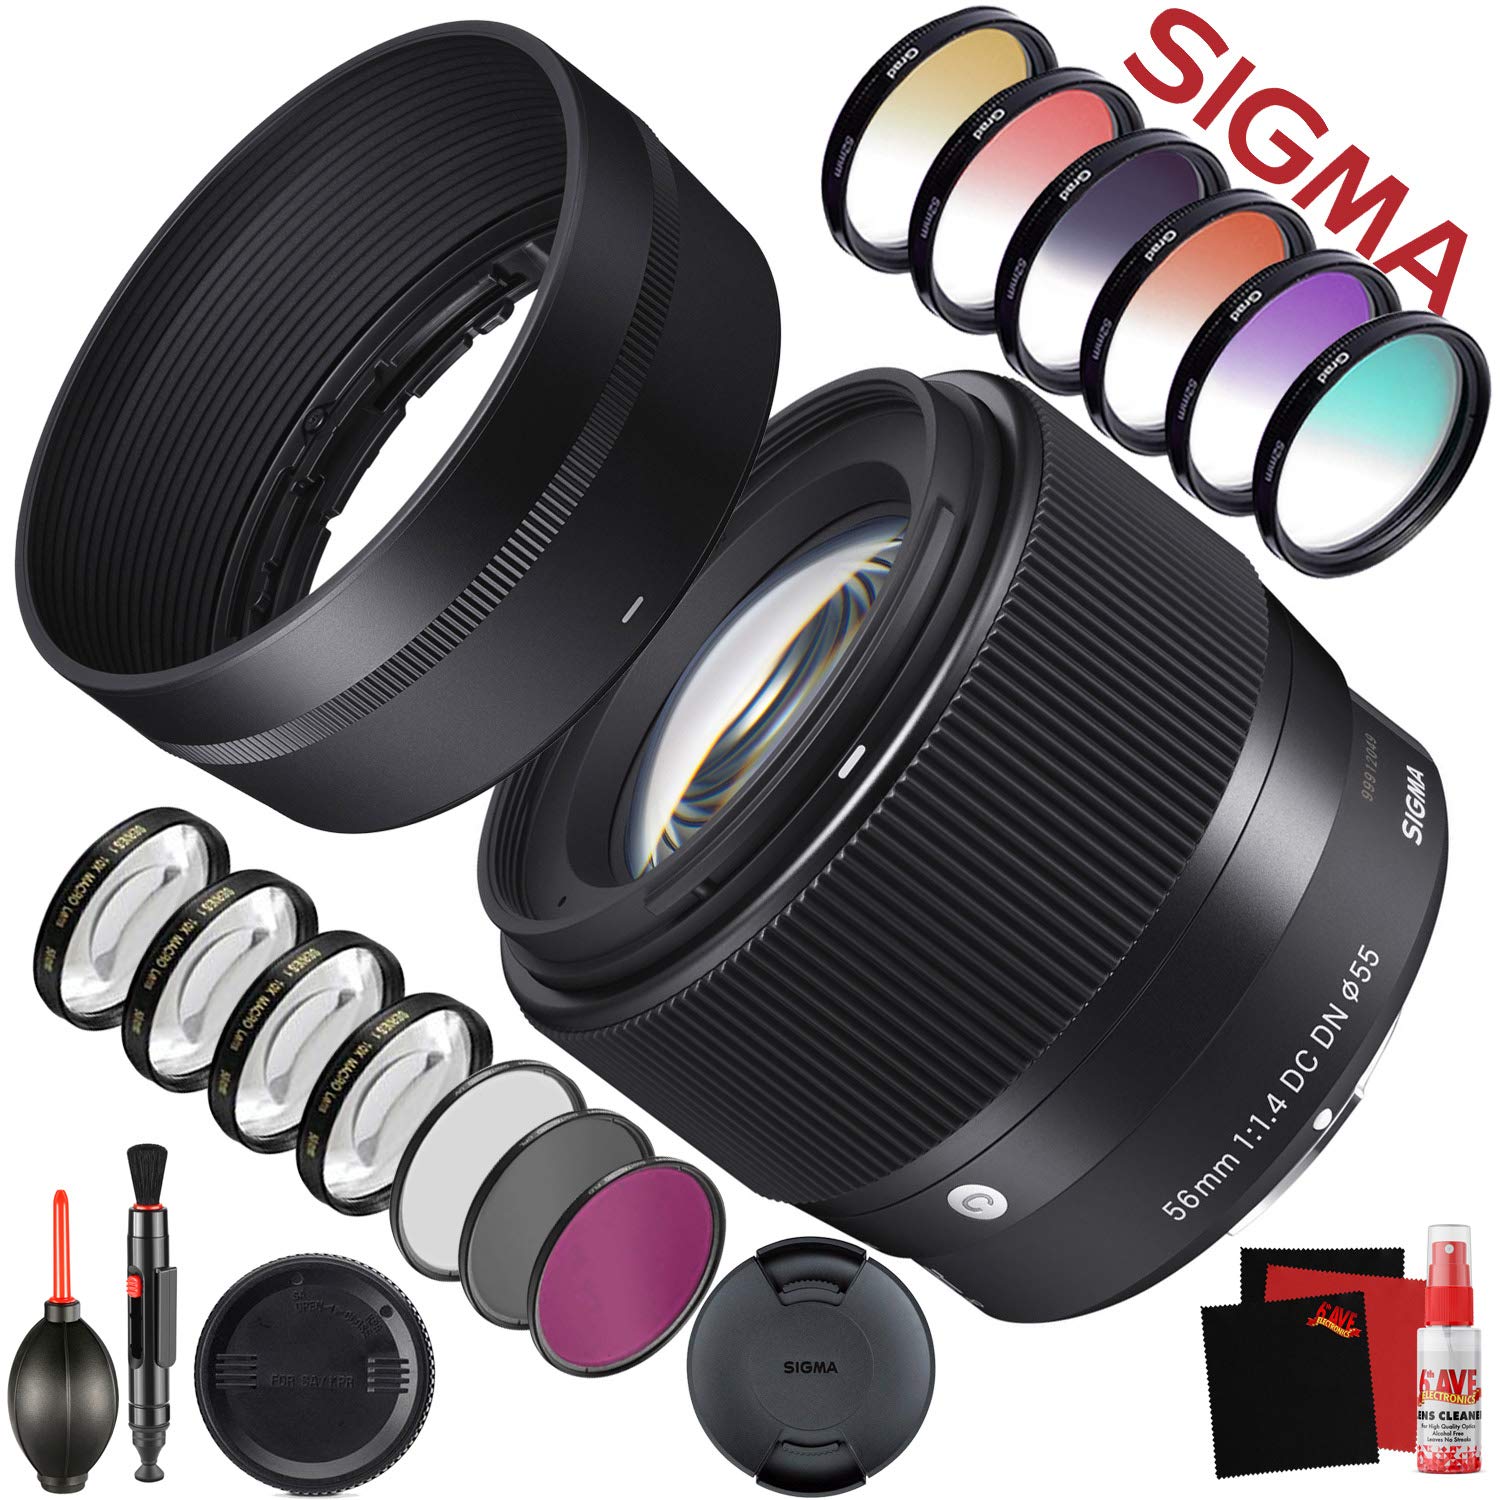 Sigma 56mm f/1.4 DC DN Contemporary Lens for Sony E  (351965)  With FLD Filter, CPL Filter, UV Filter - Color Graduated Filter Kit - Close Up Filter Kit and Cleaning Accessories Bundle